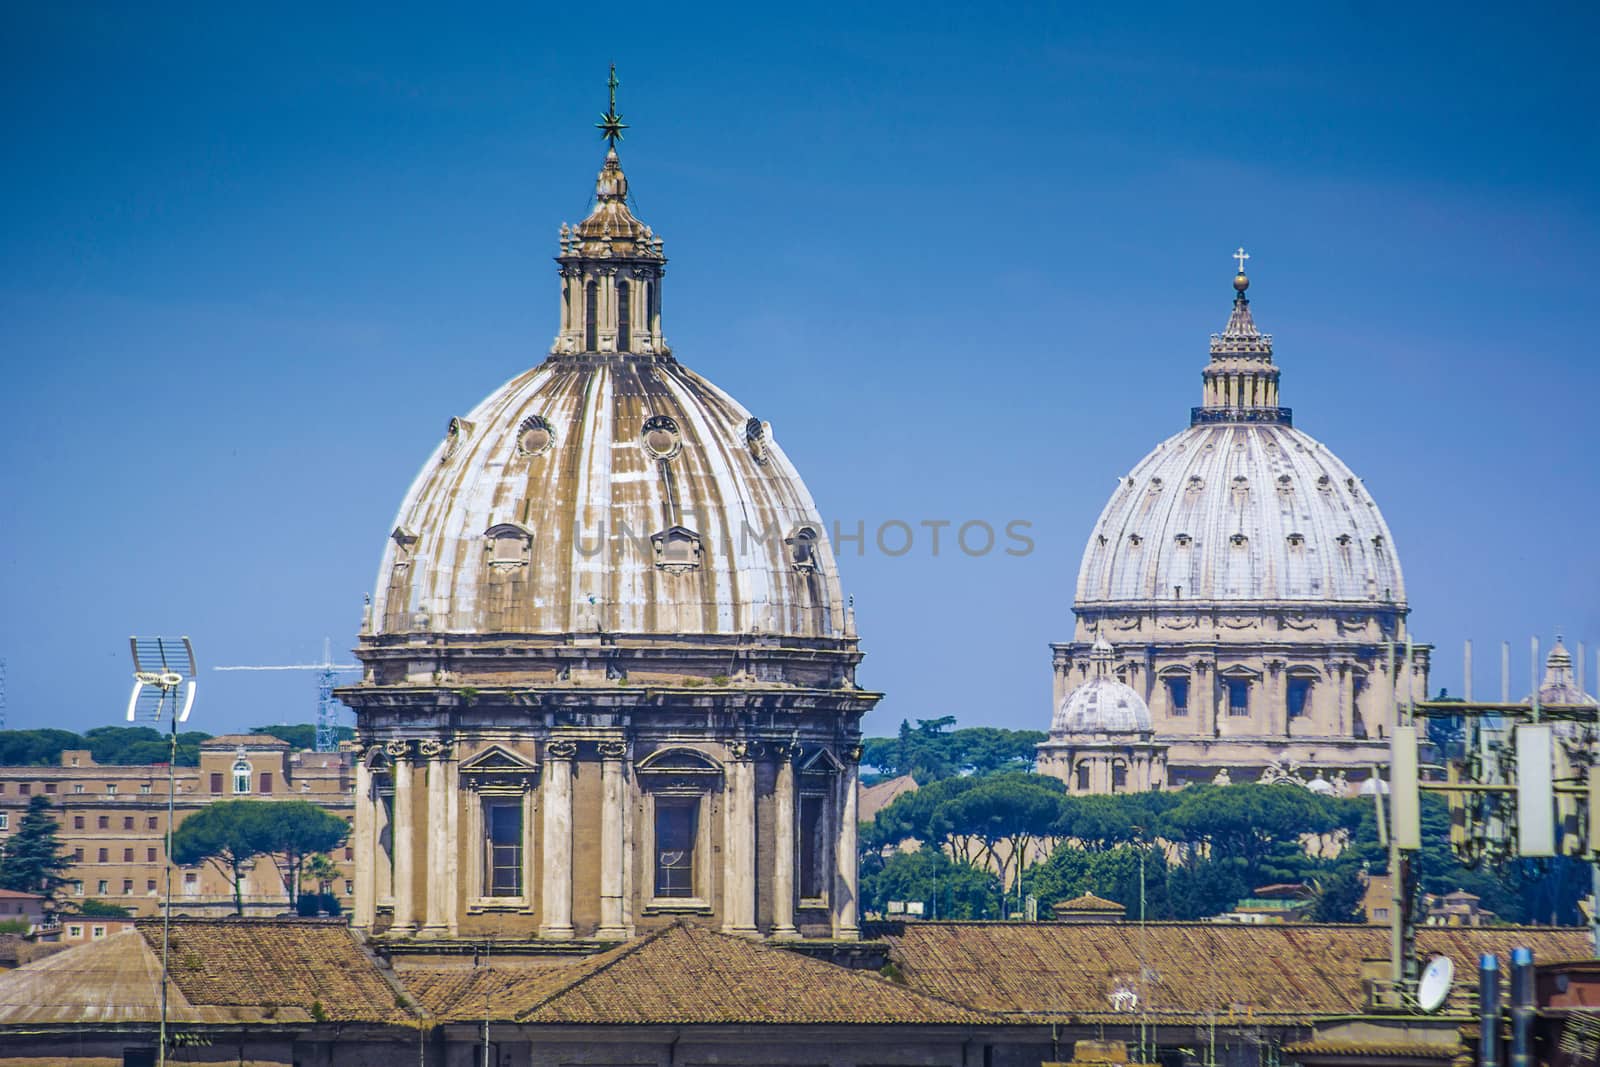 Rome skyline made of famous domes